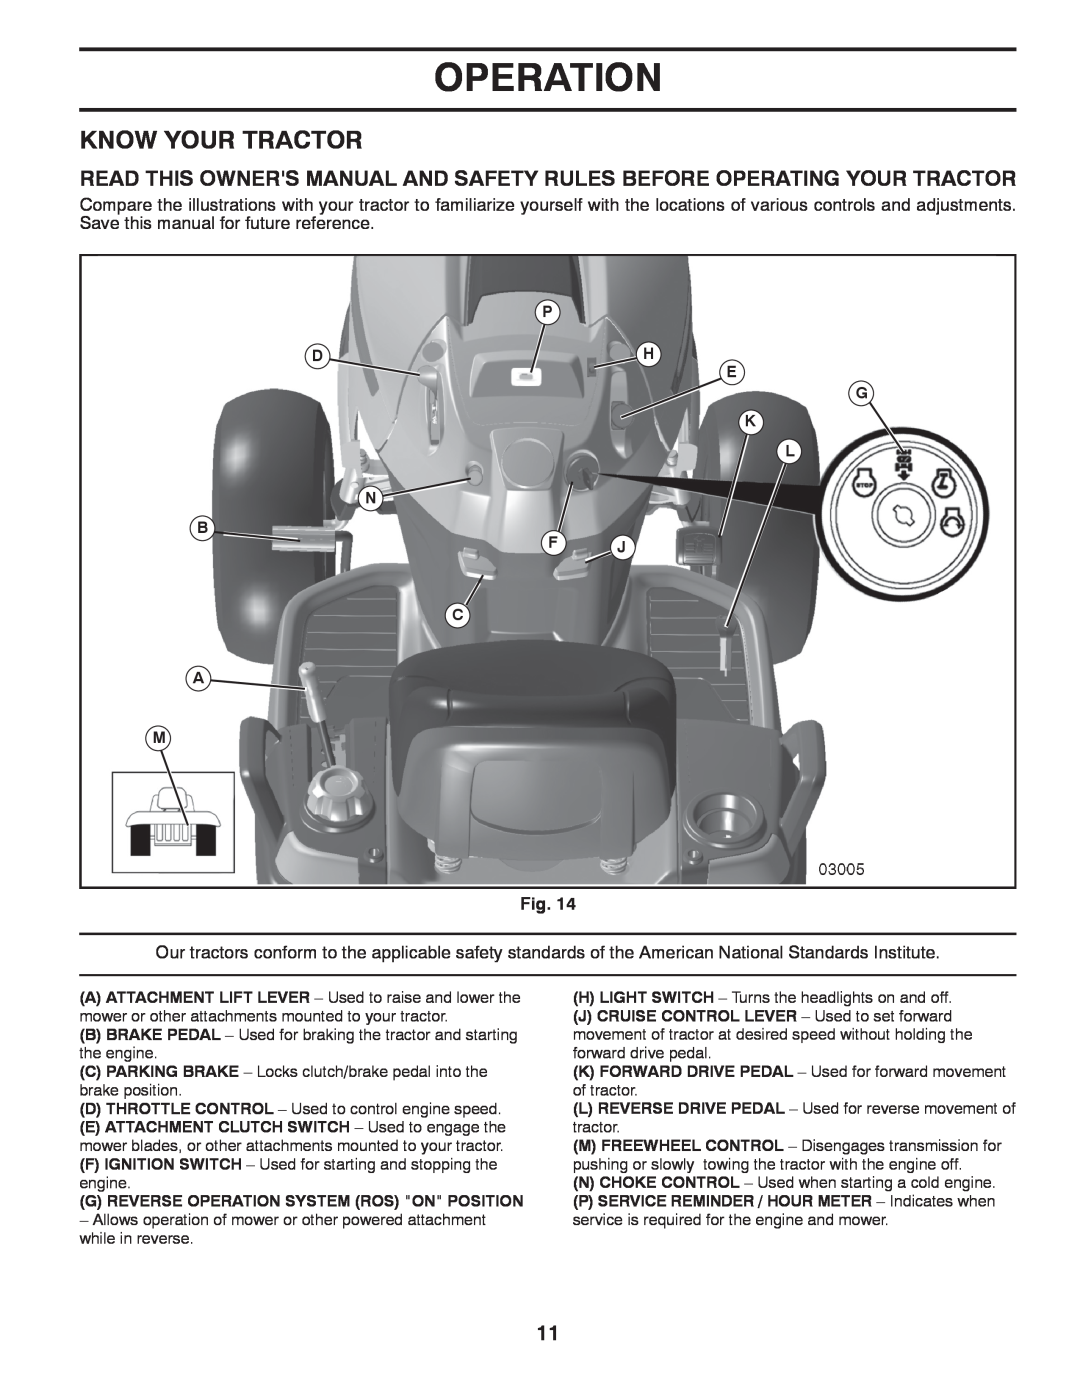 Husqvarna YTH2754T manual Know Your Tractor, Operation 